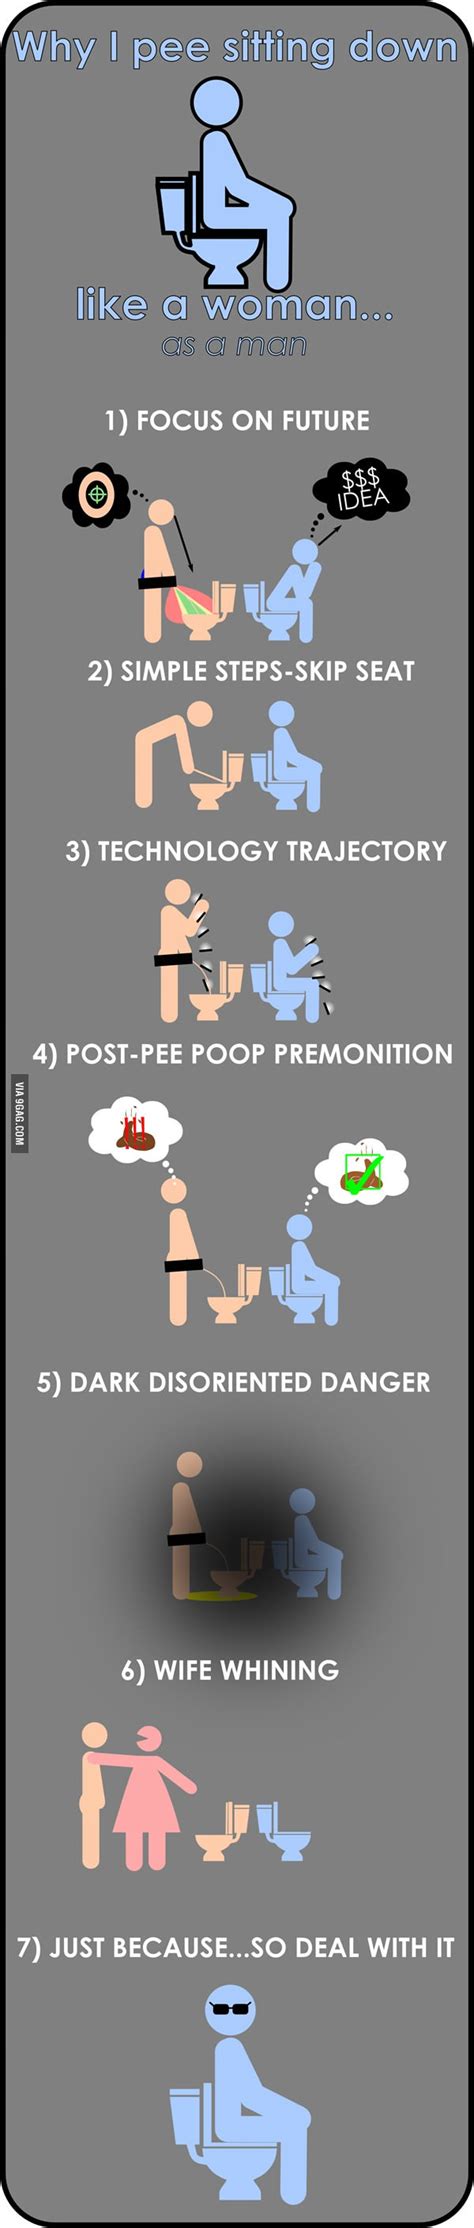 7 Reasons Why I Pee Sitting Down Like A Woman As A Man Funny Memes Funny Photos Funny